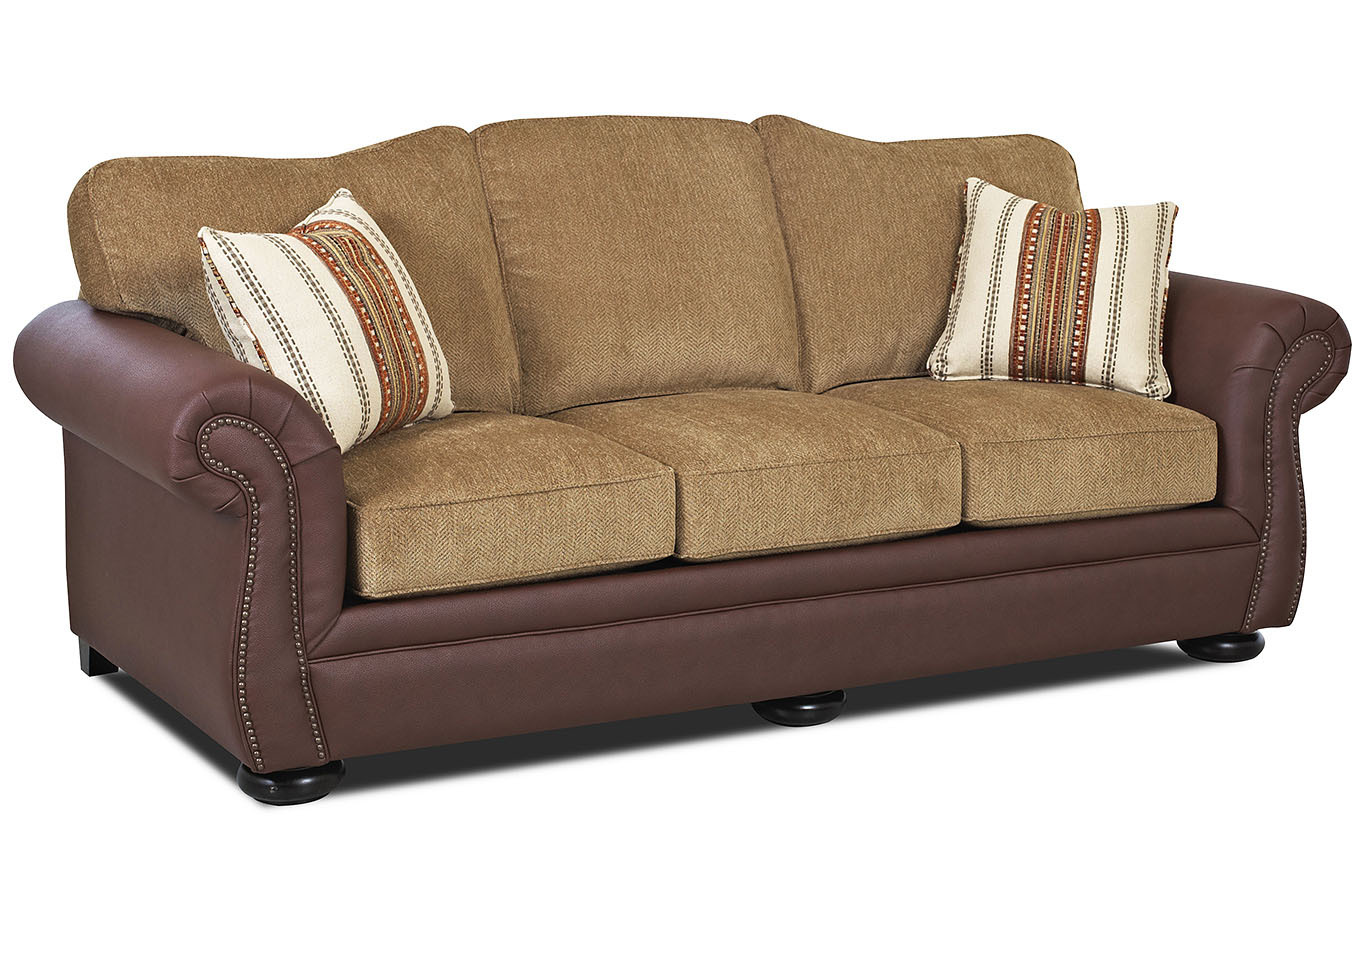 Platter Street Dark Brown and Beige Leather and Fabric Sofa,Klaussner Home Furnishings